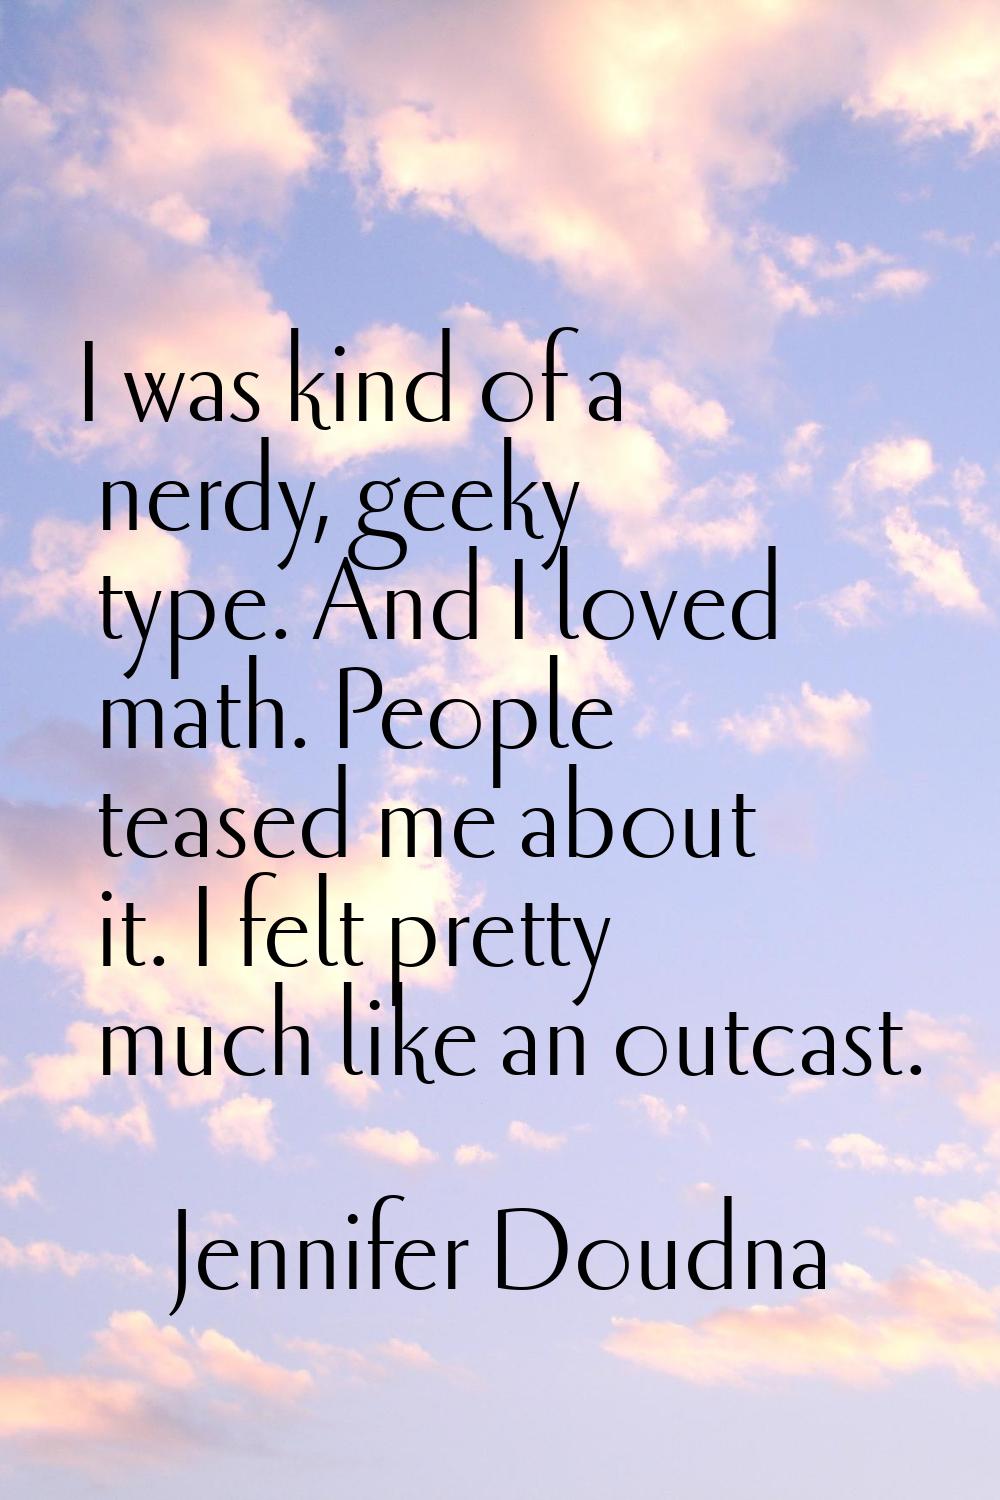 I was kind of a nerdy, geeky type. And I loved math. People teased me about it. I felt pretty much 